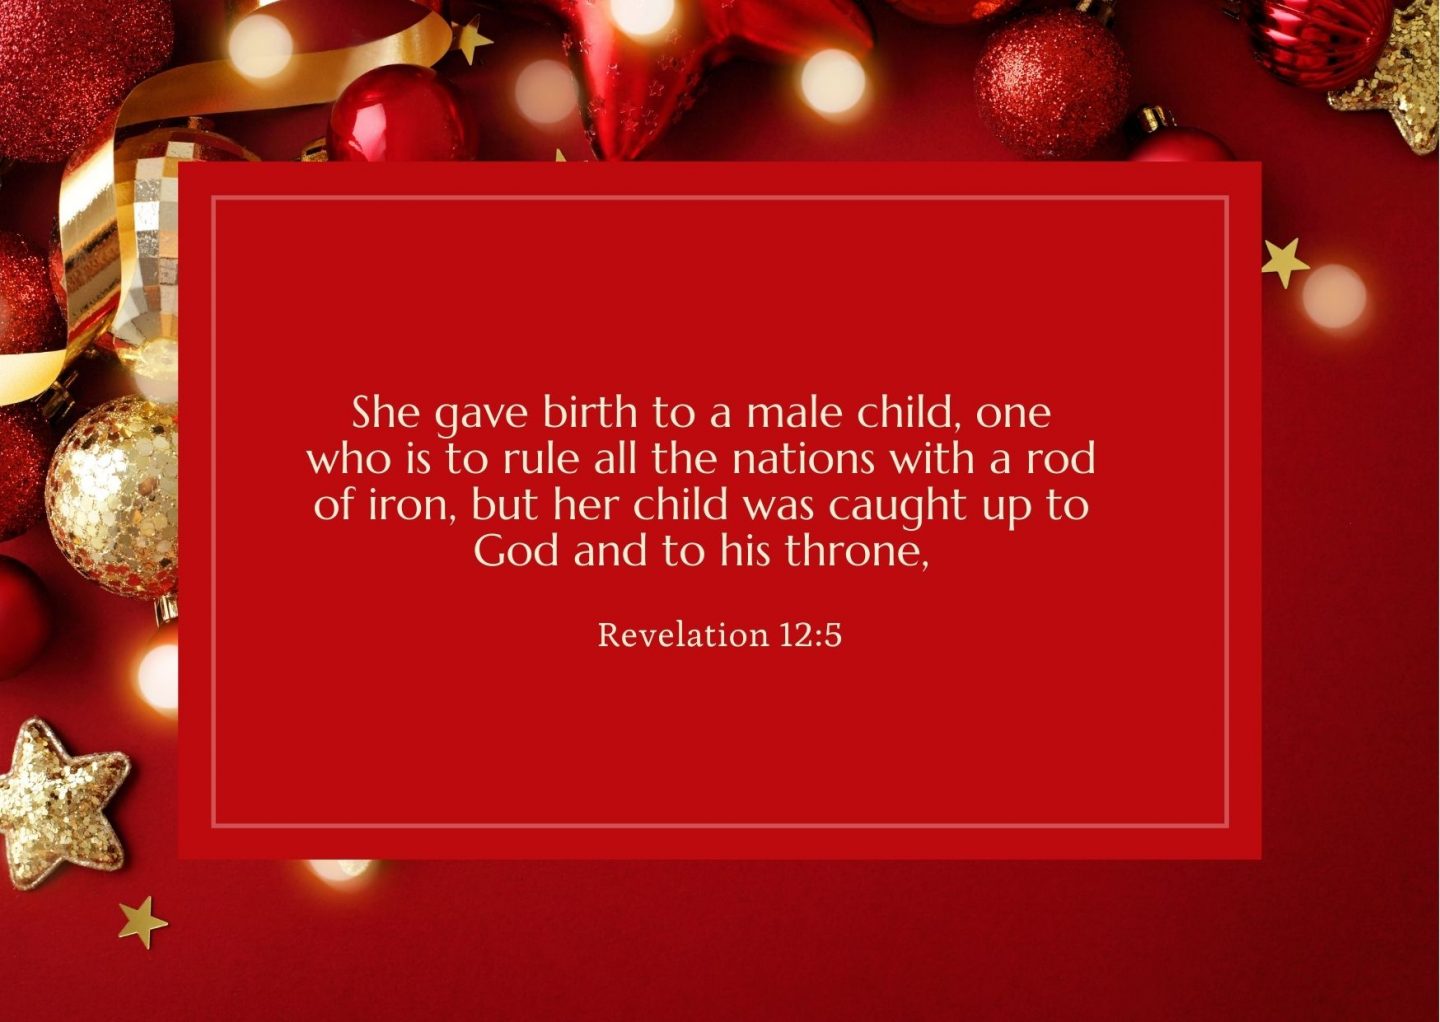 She gave birth to a male child, one who is to rule all the nations with a rod of iron, but her child was caught up to God and to his throne, Revelation 12:5